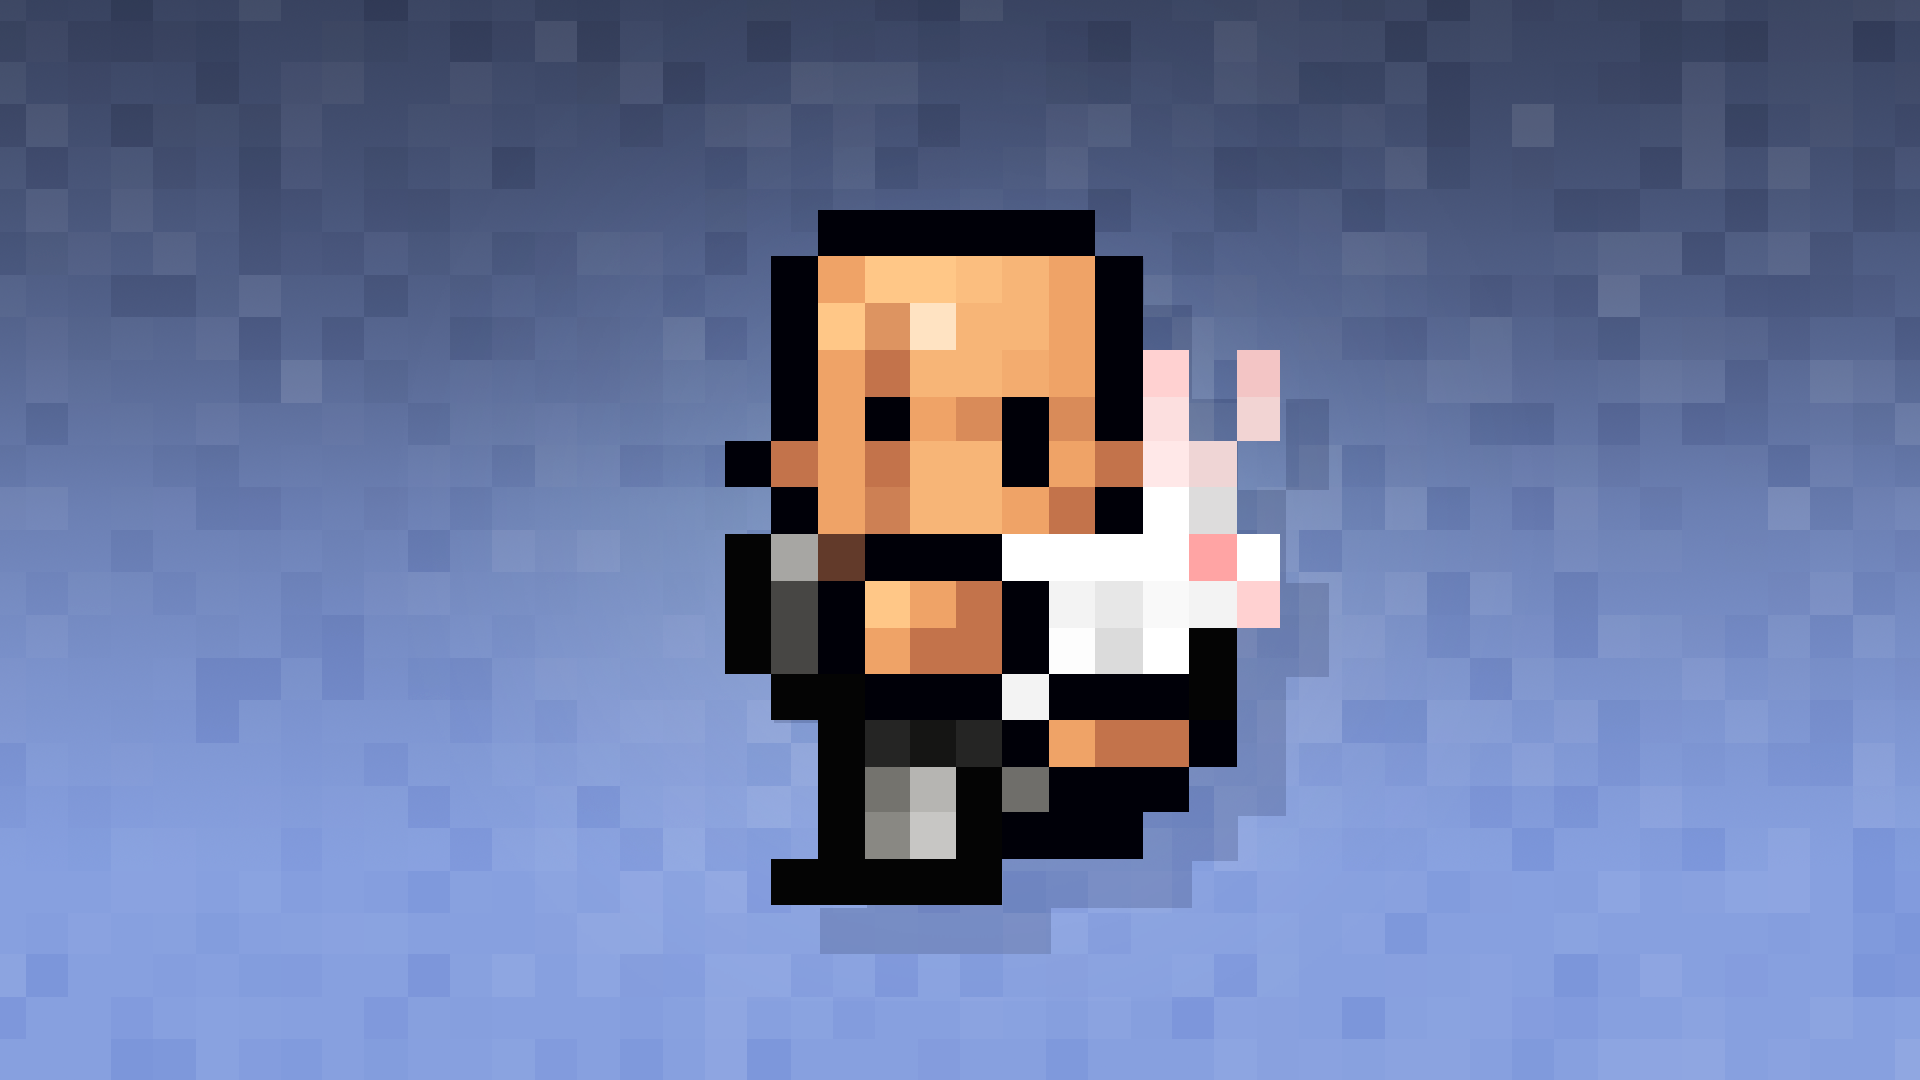 Icon for Spy Hard